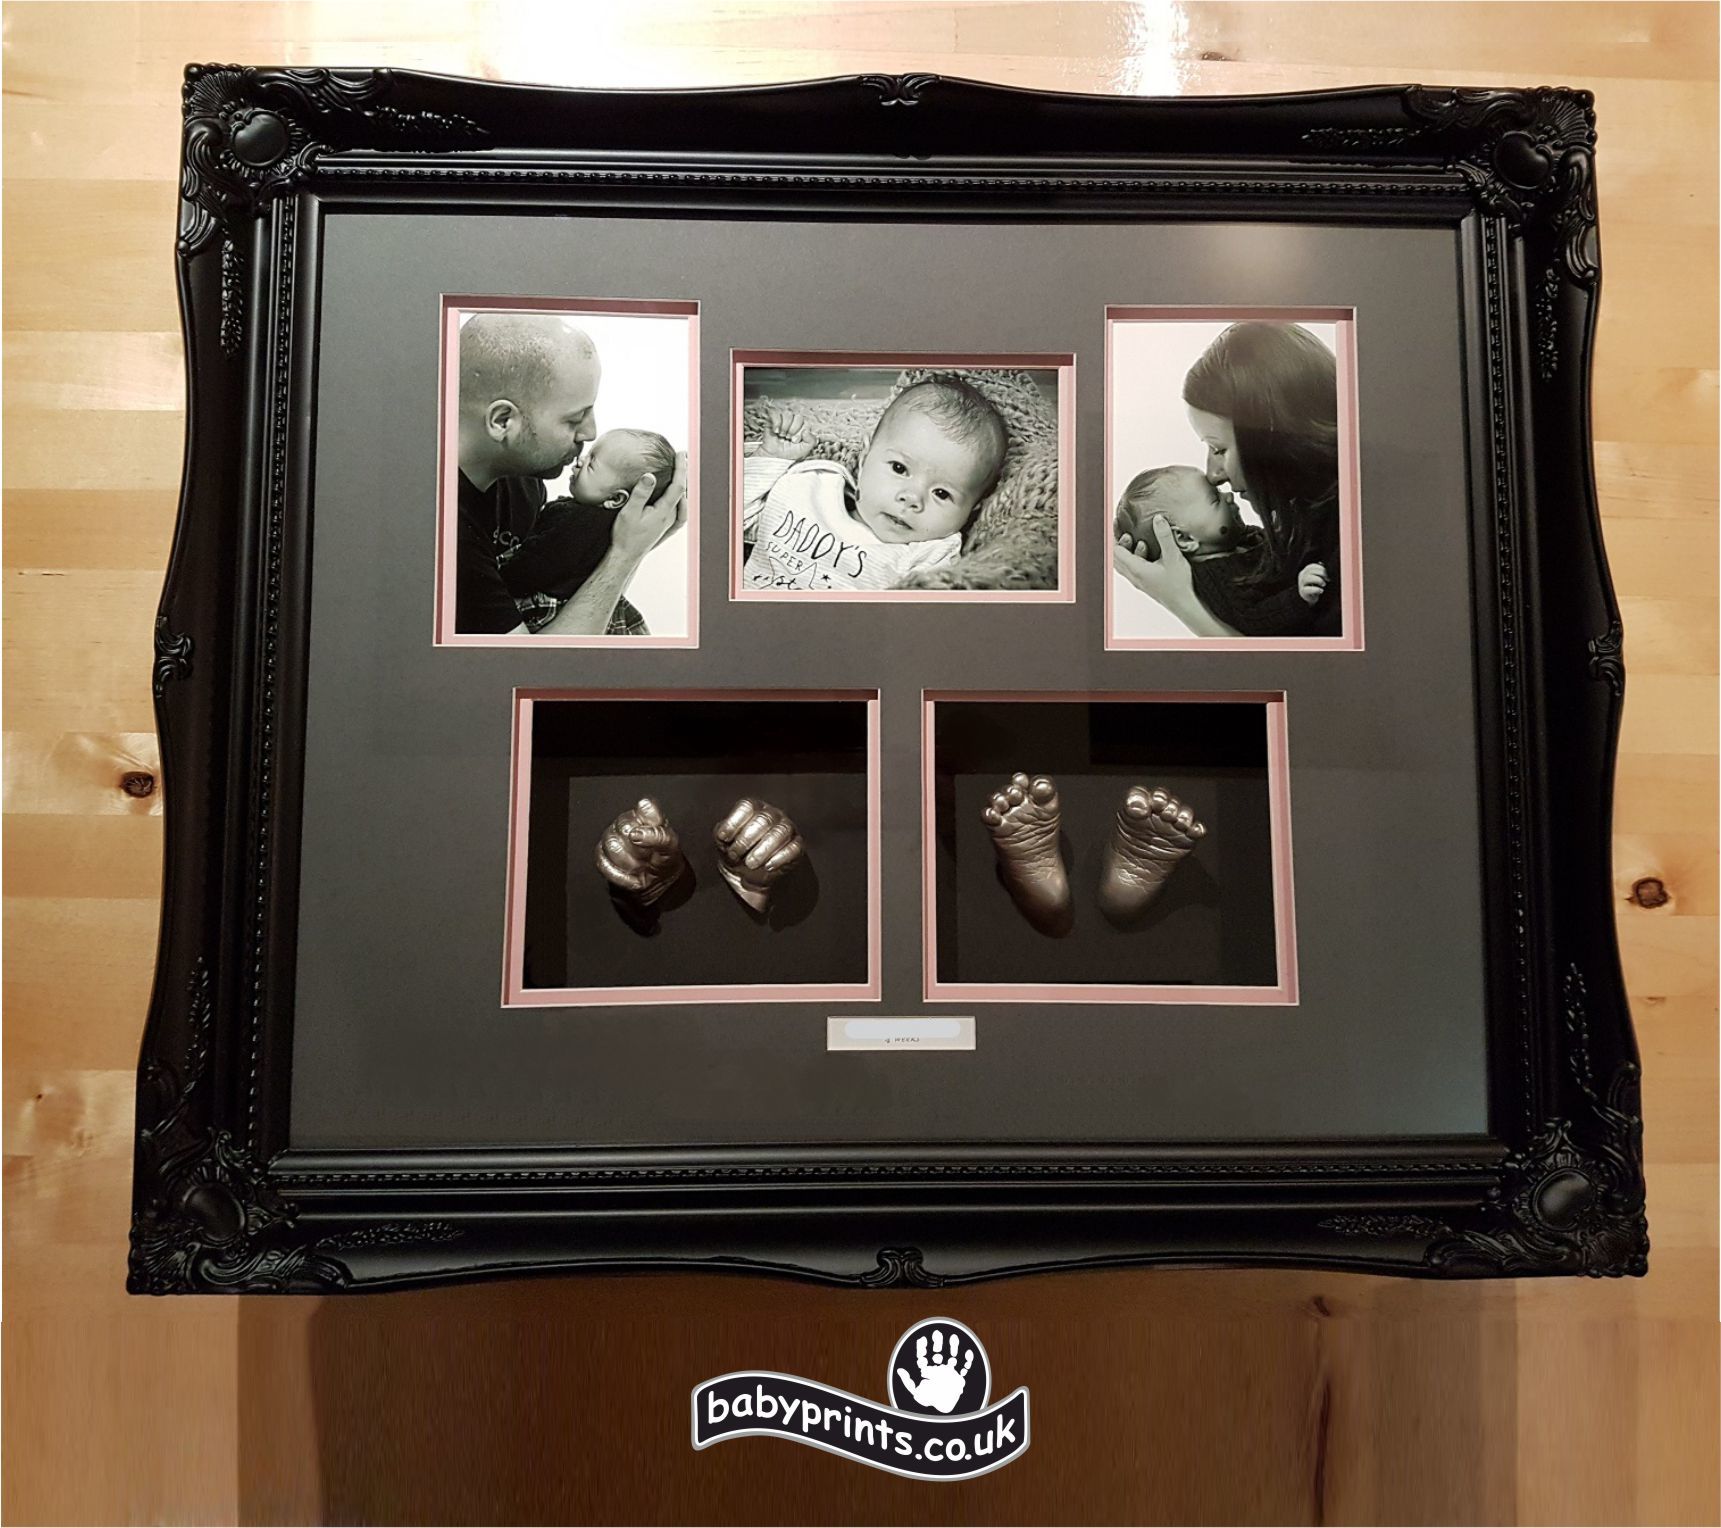 Baby feet and hands Statues and photos framed